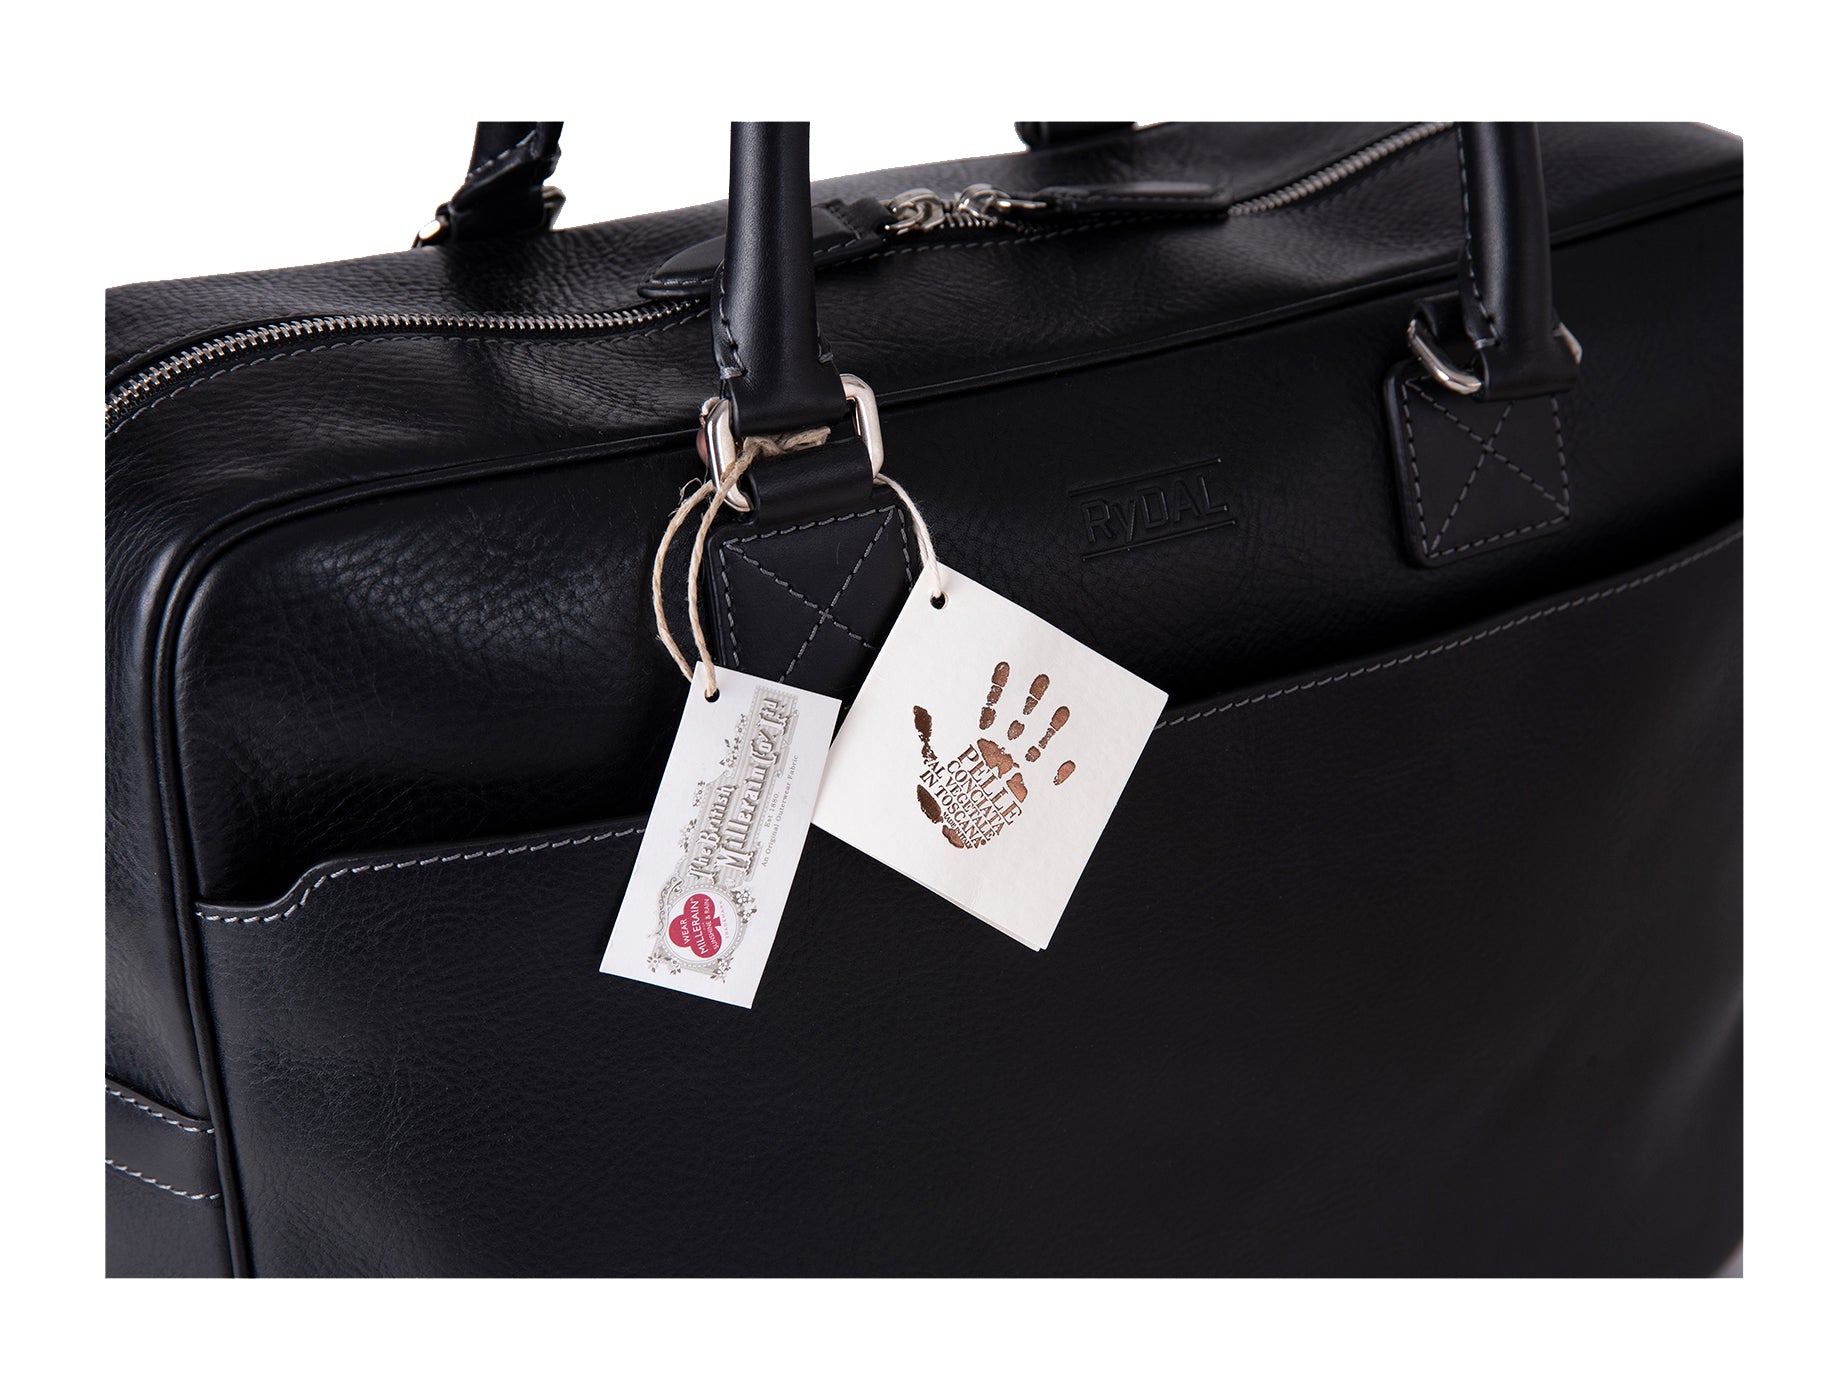 The Lexington Mens Leather Briefcase from Rydal in 'Black' with Guarantee Tags.